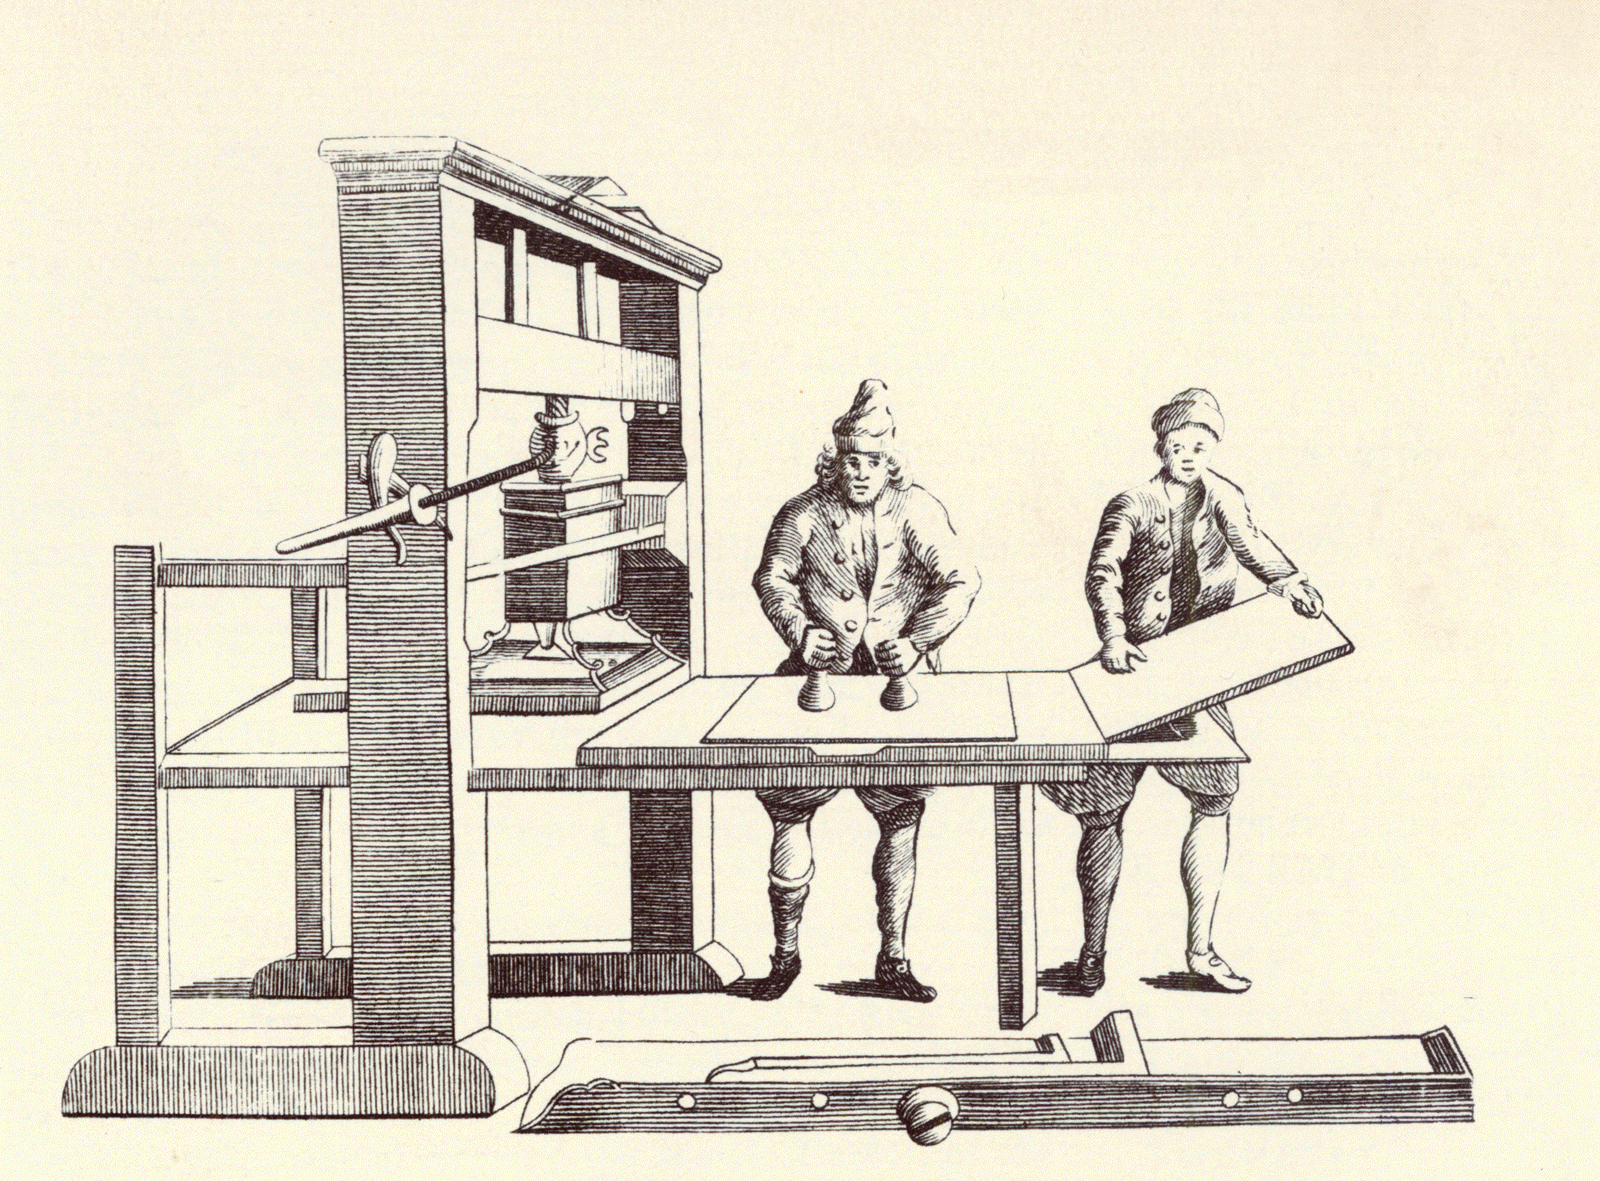 Animation showing the Constitution being produced on a printing press